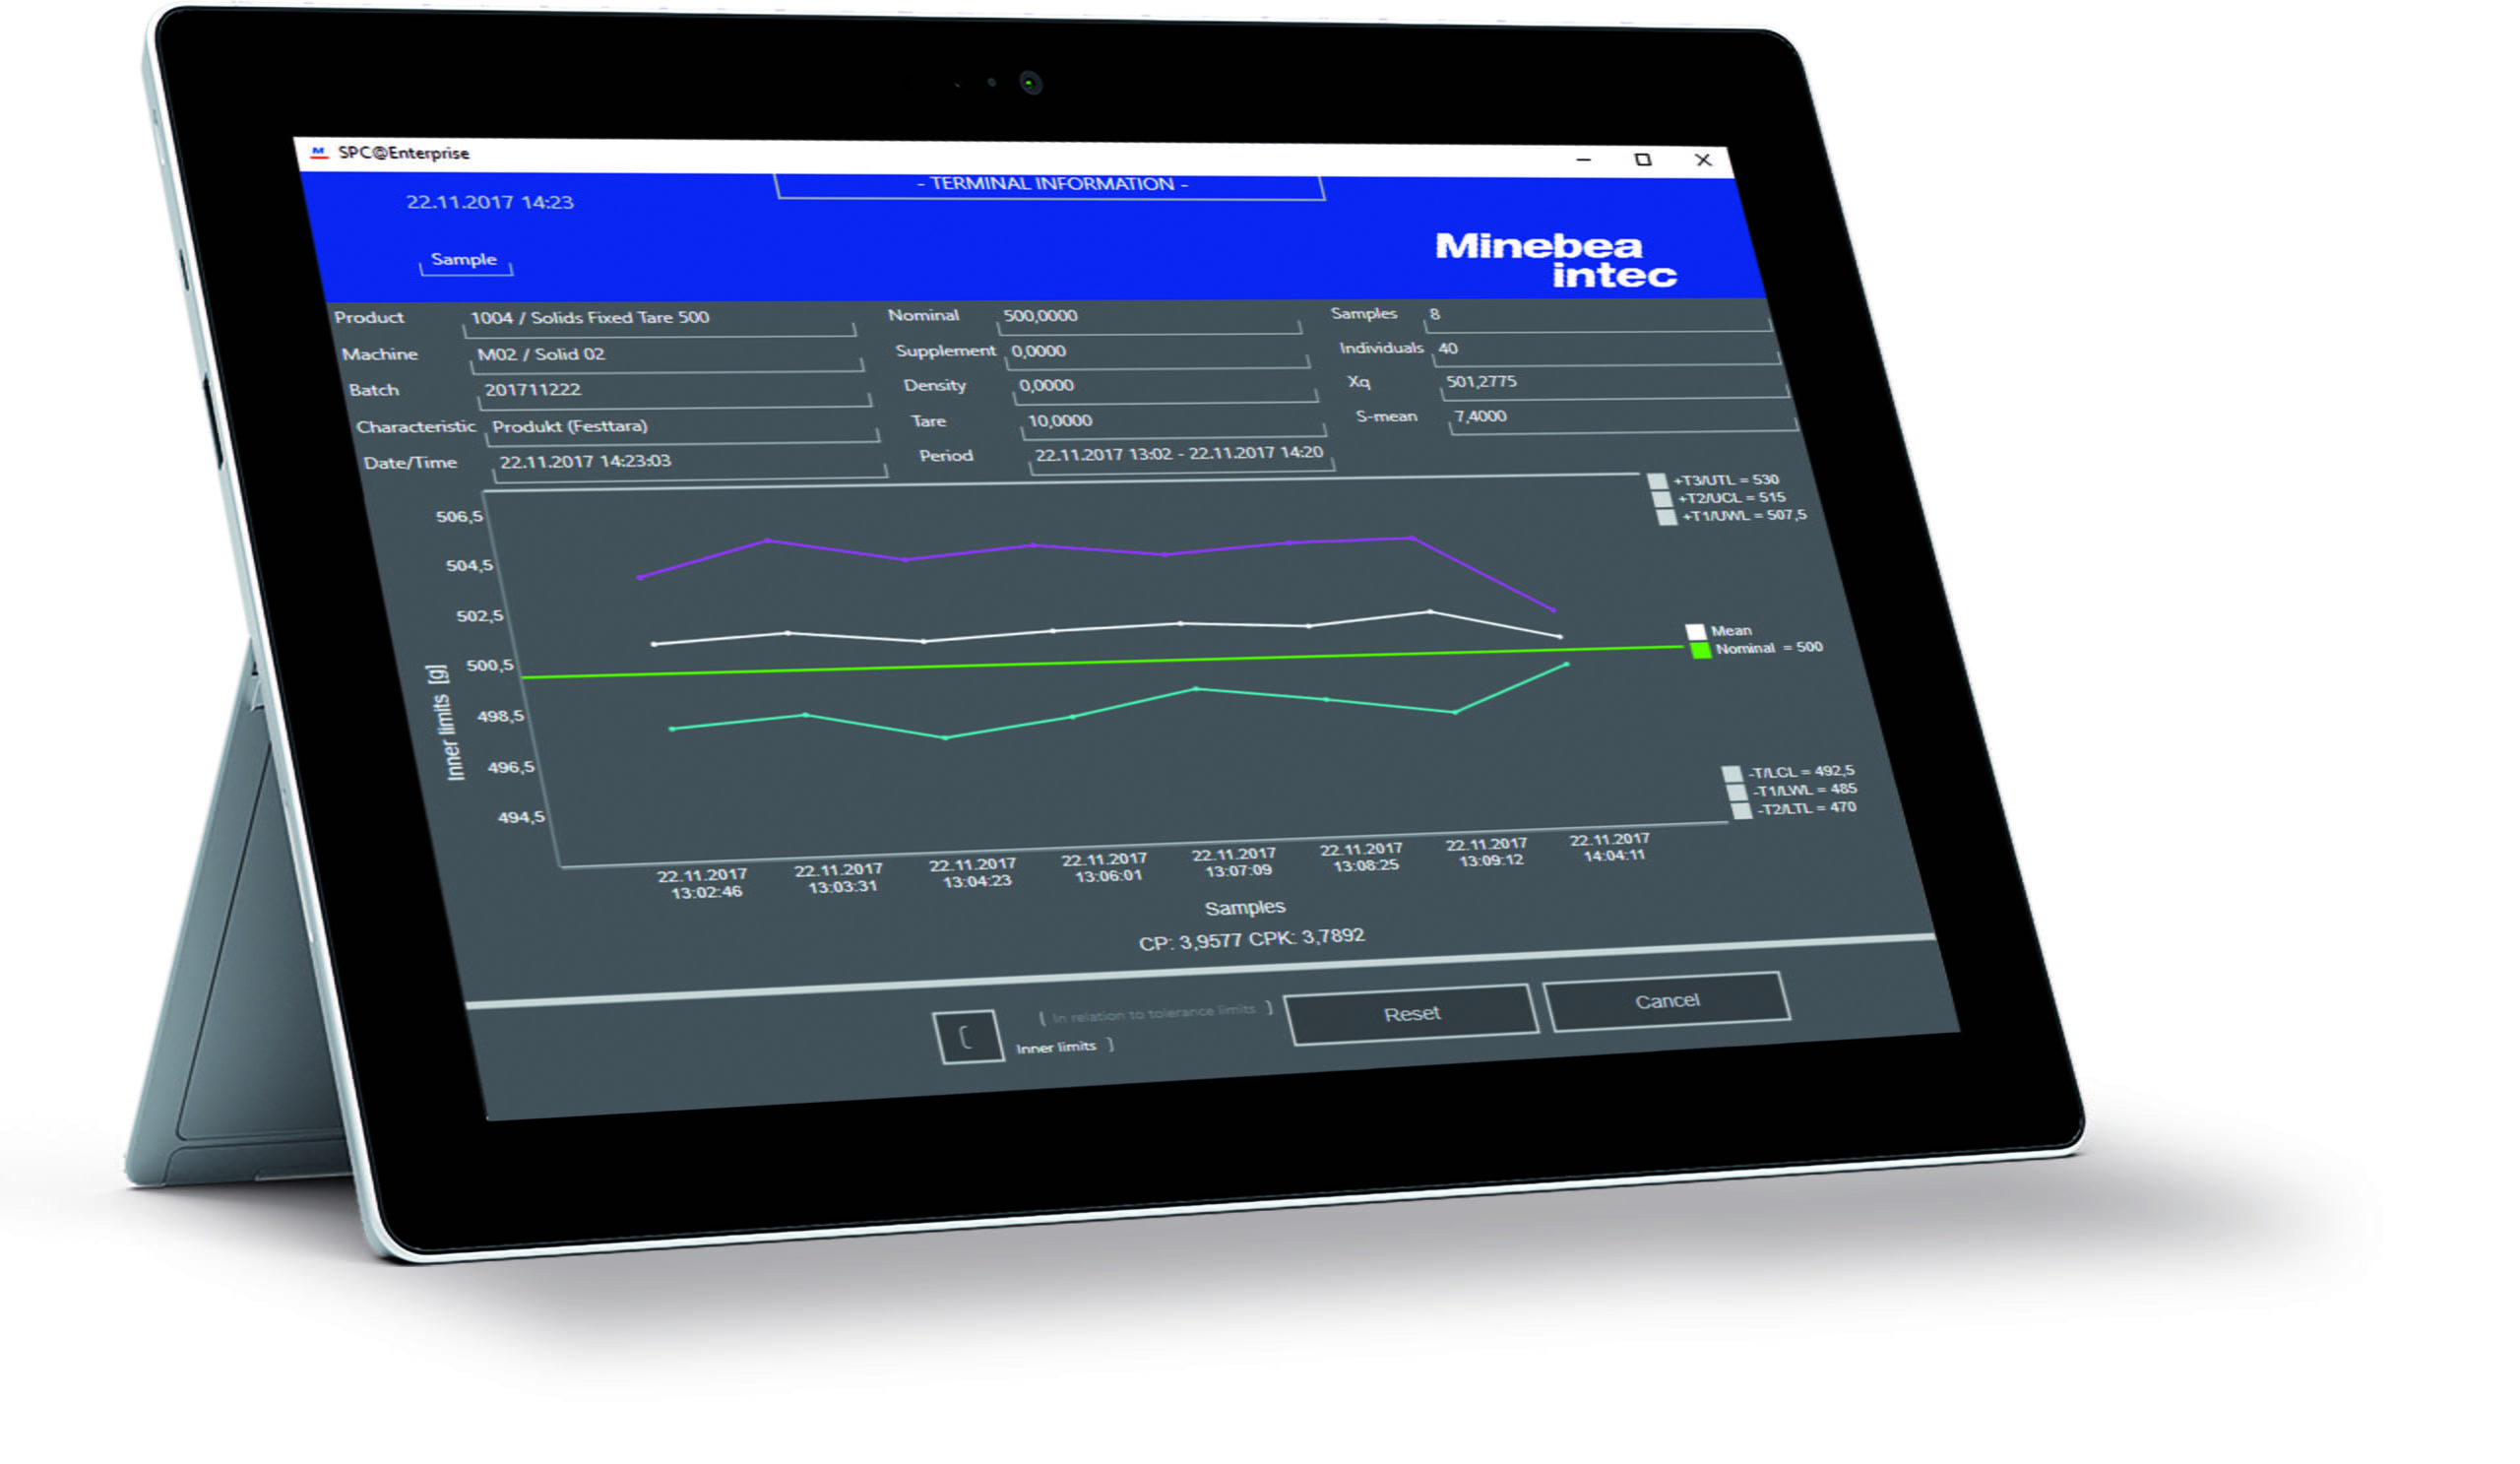 A tablet with data image from Minebea Intec SPC@Enterprise software.